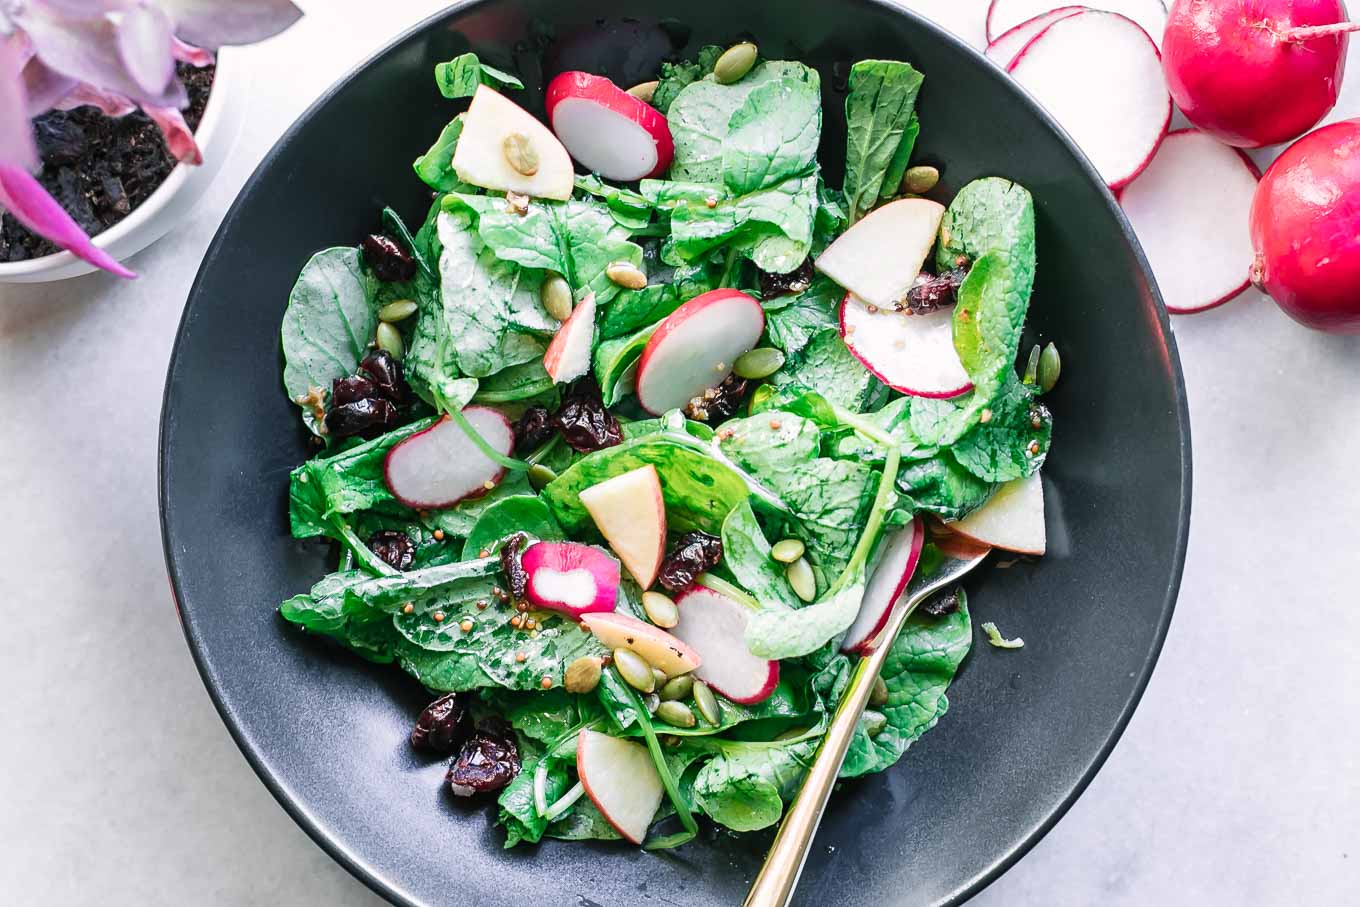 radish greens salad in a black bowl on a white table